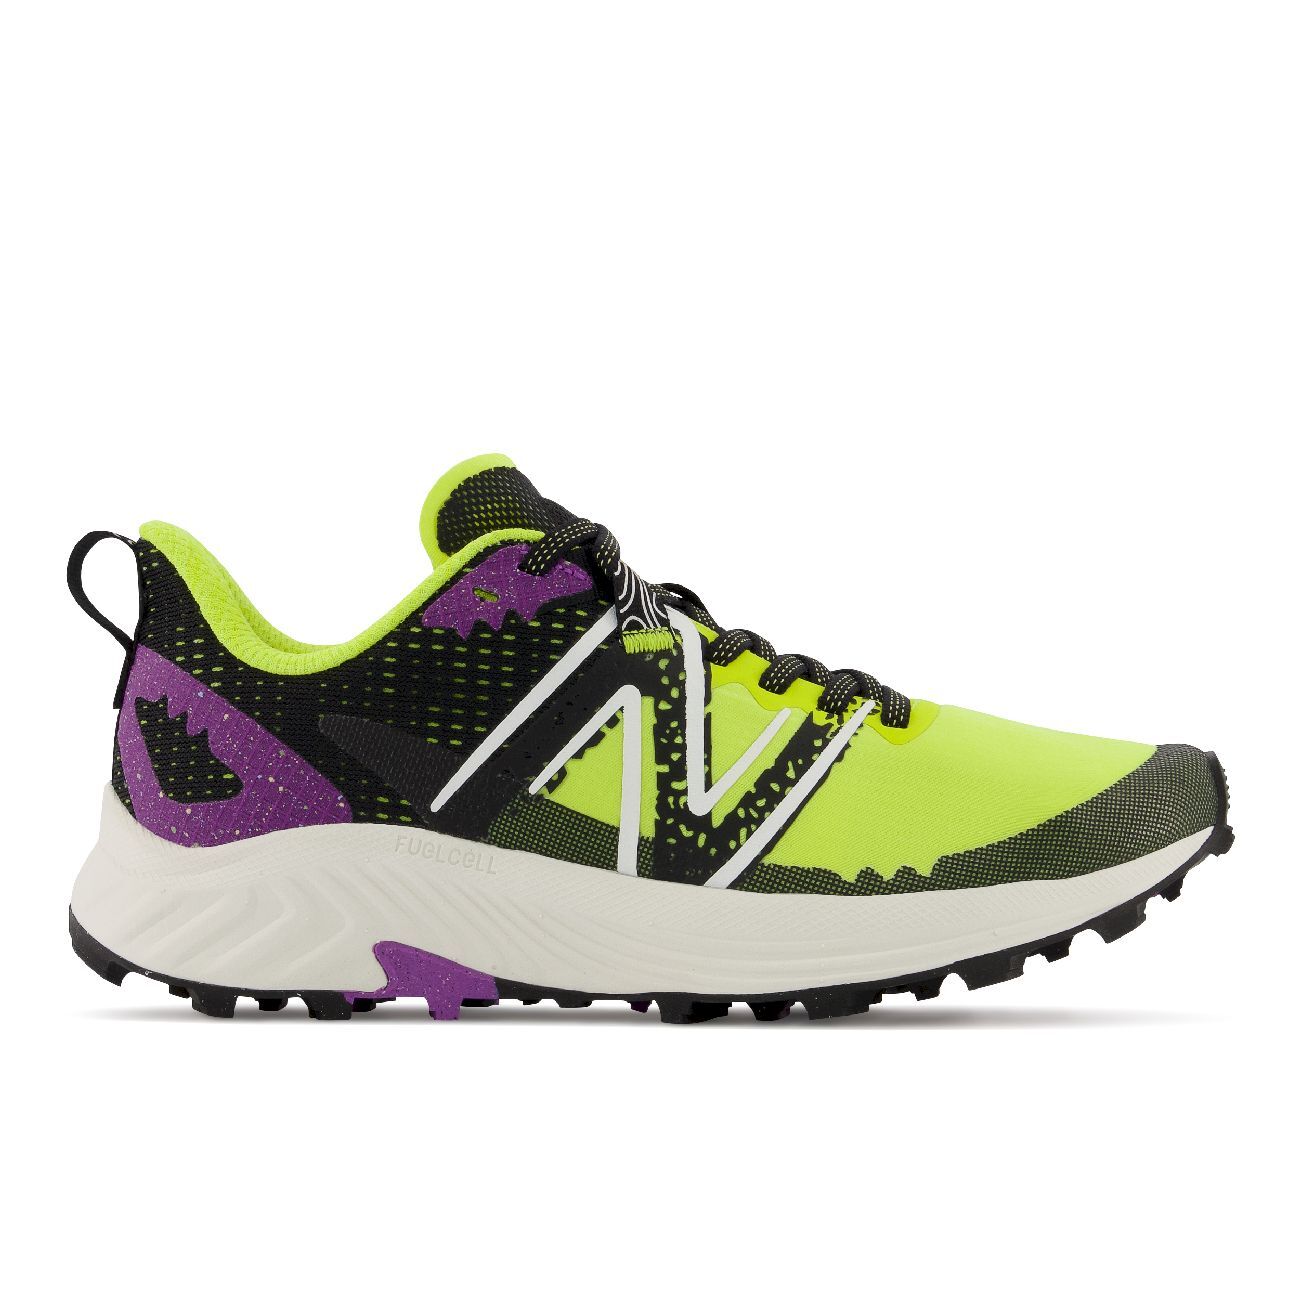 New Balance Summit Unknown V3 - Trail running shoes - Women's